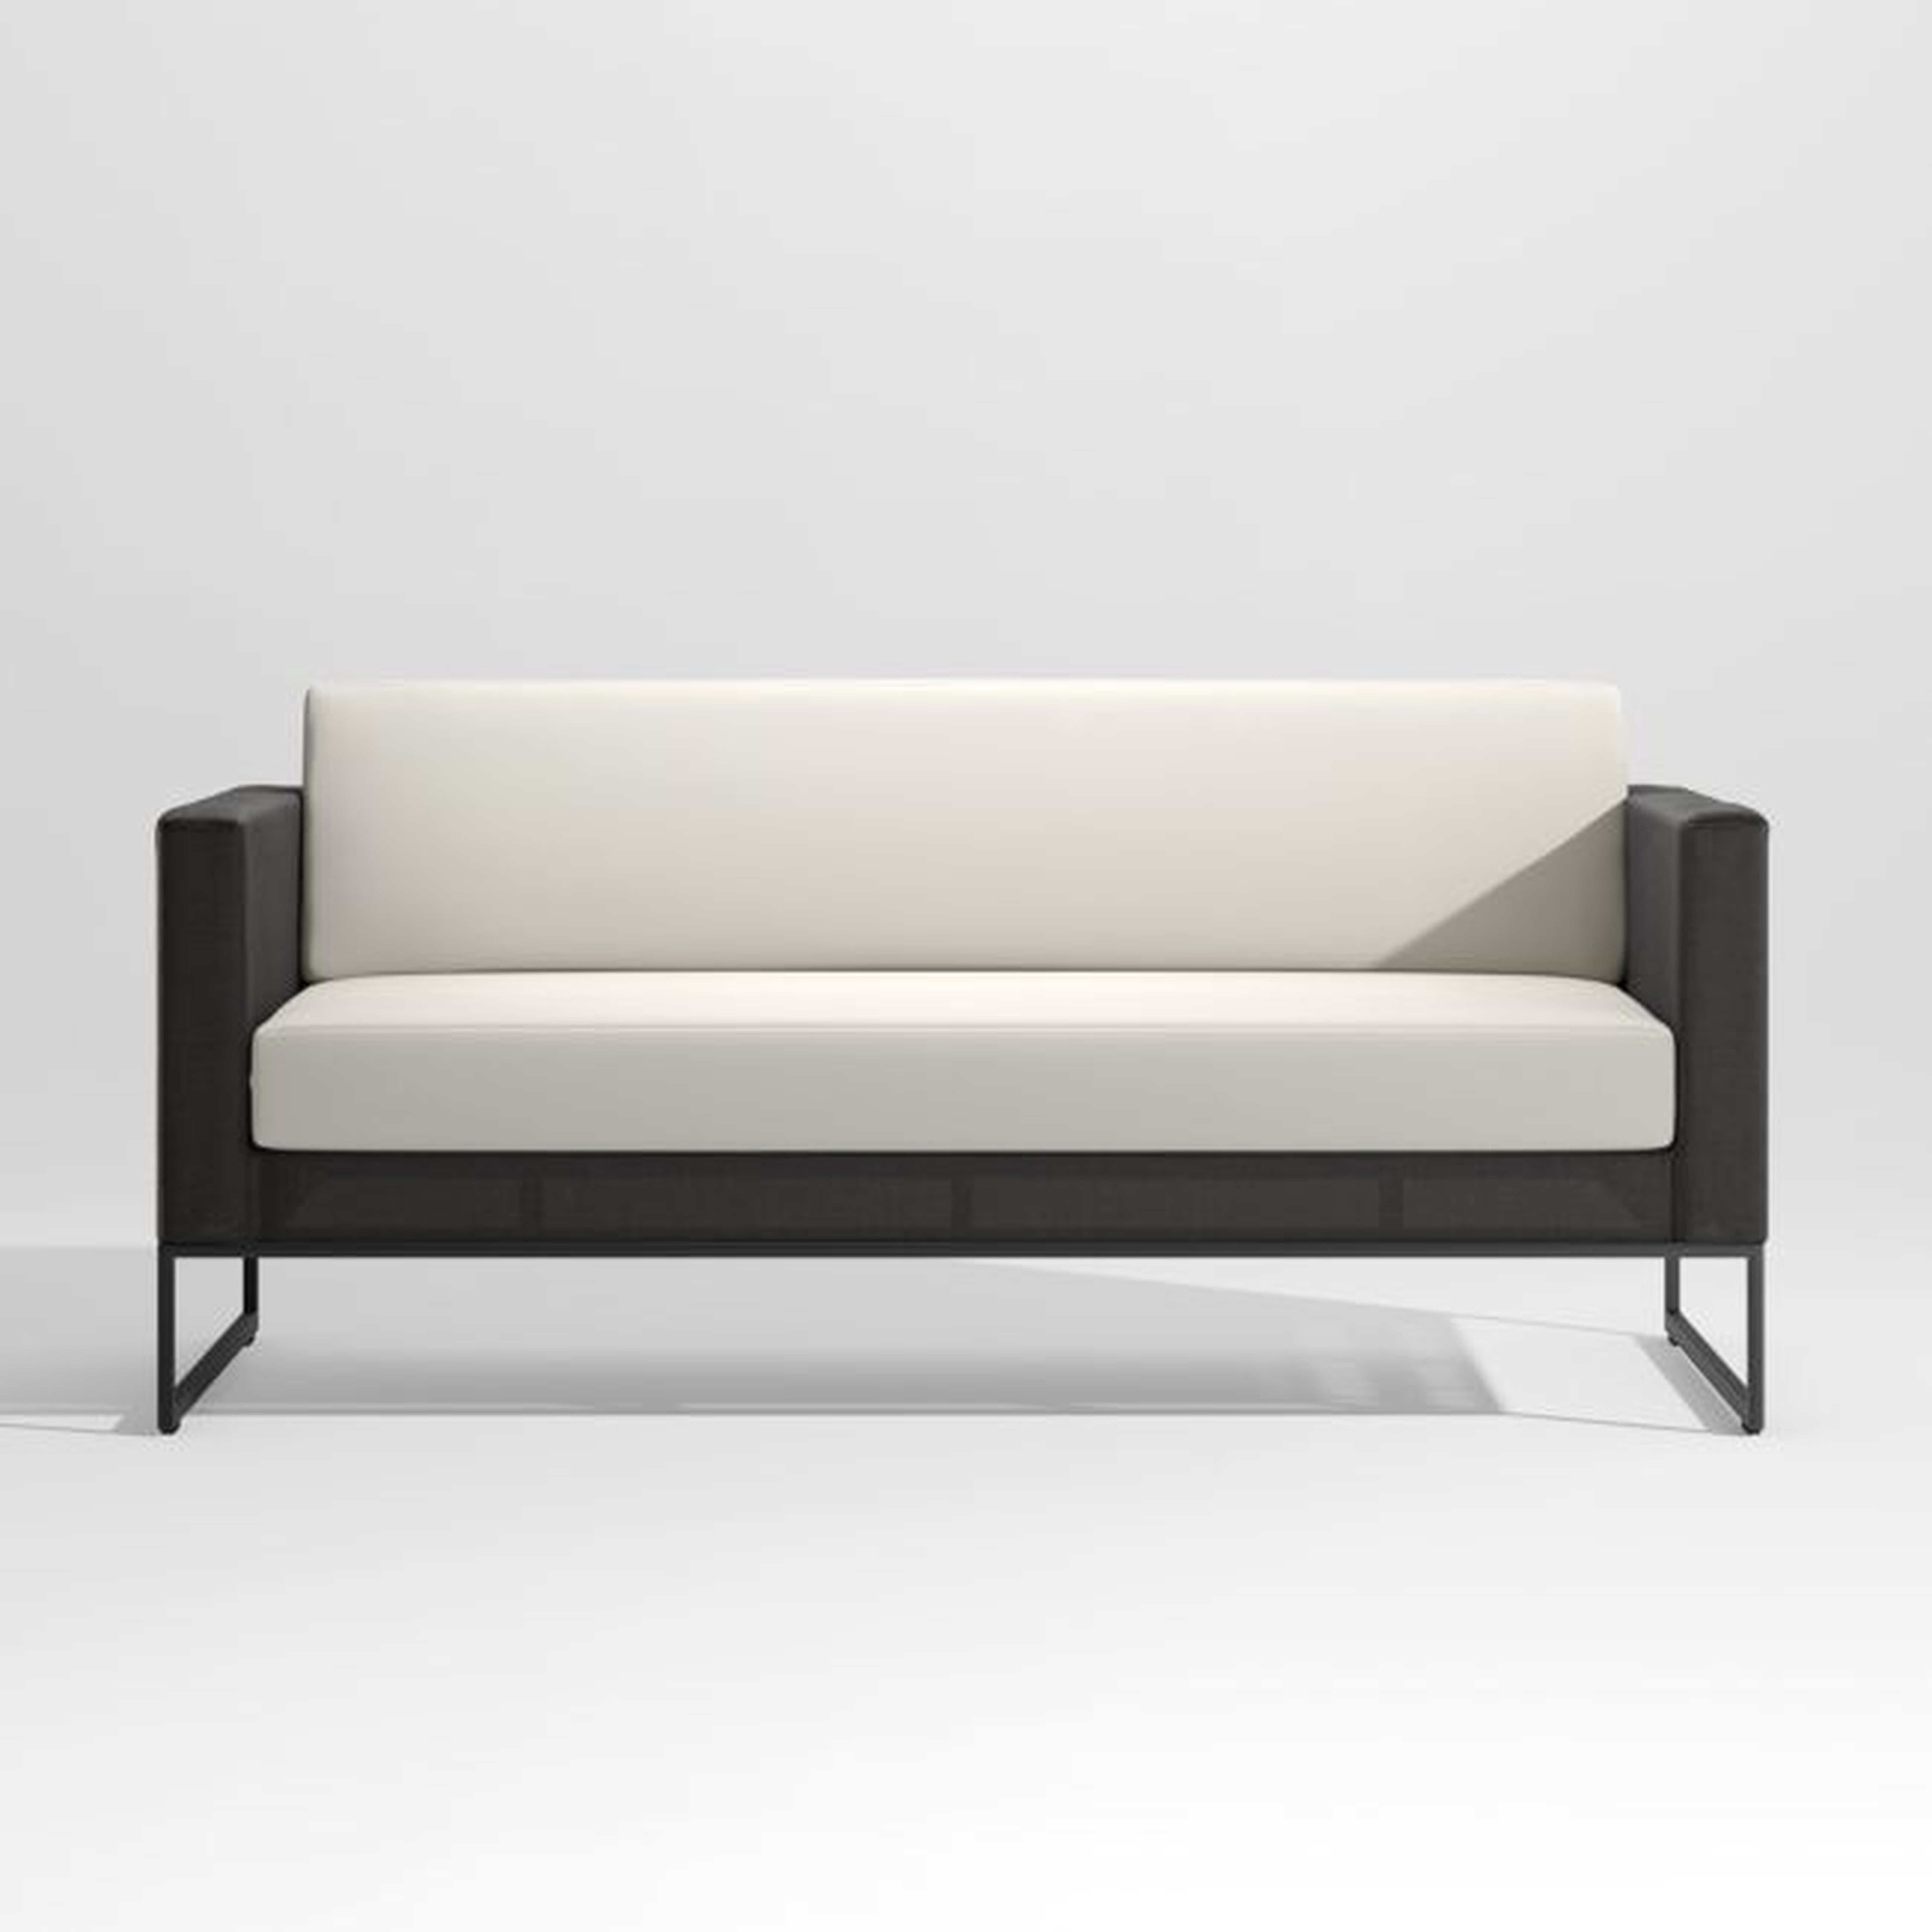 Dune Black Outdoor Sofa with White Cushions - Crate and Barrel